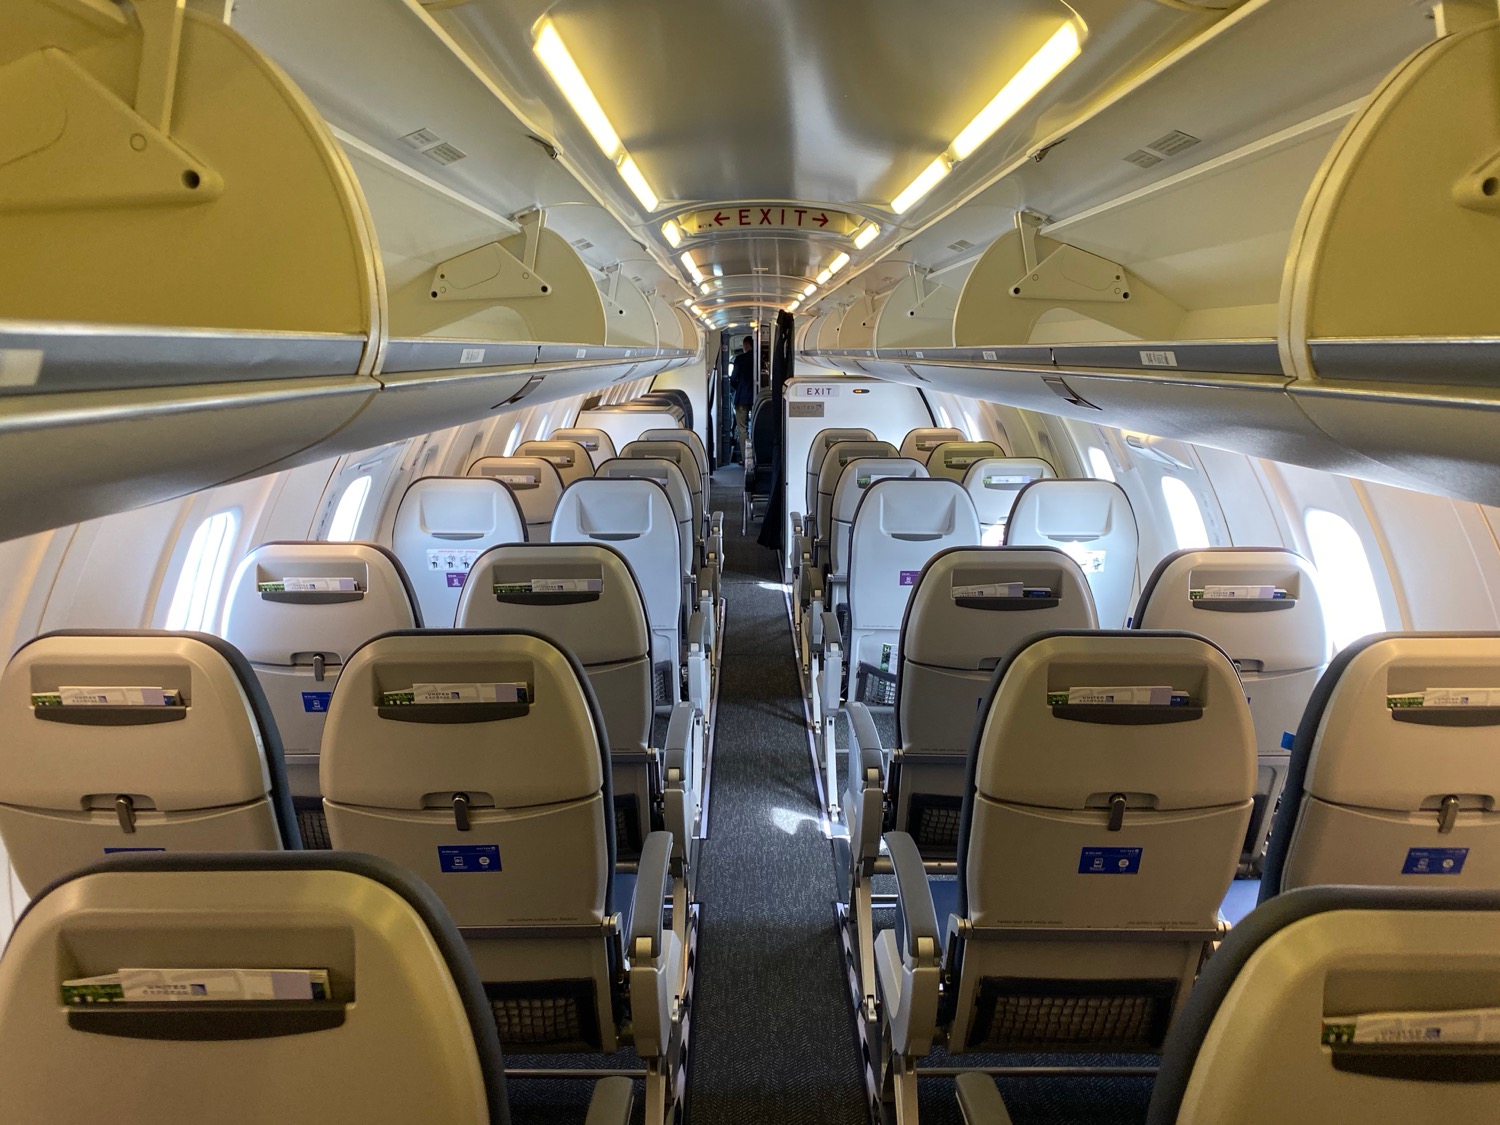 the inside of an airplane